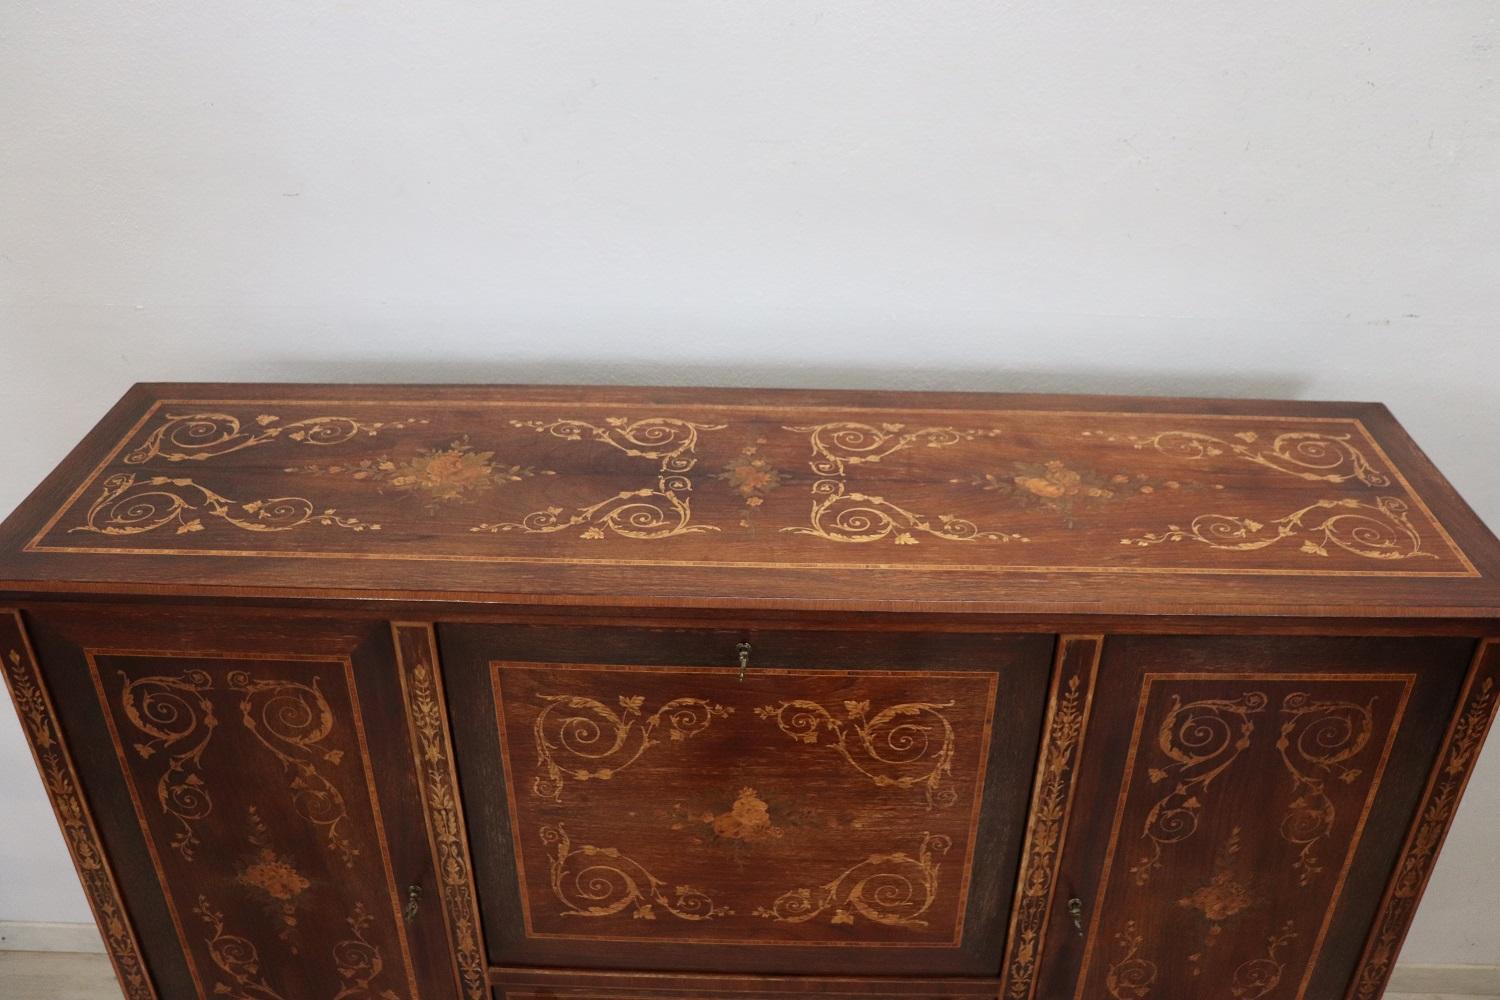 Elegant sideboard in precious inlaid walnut 1930s. This sideboard is characterized by a refined inlay work with neoclassical decorations. Beautiful with flowers decorate each side of this precious piece of furniture. The inlay is made using many